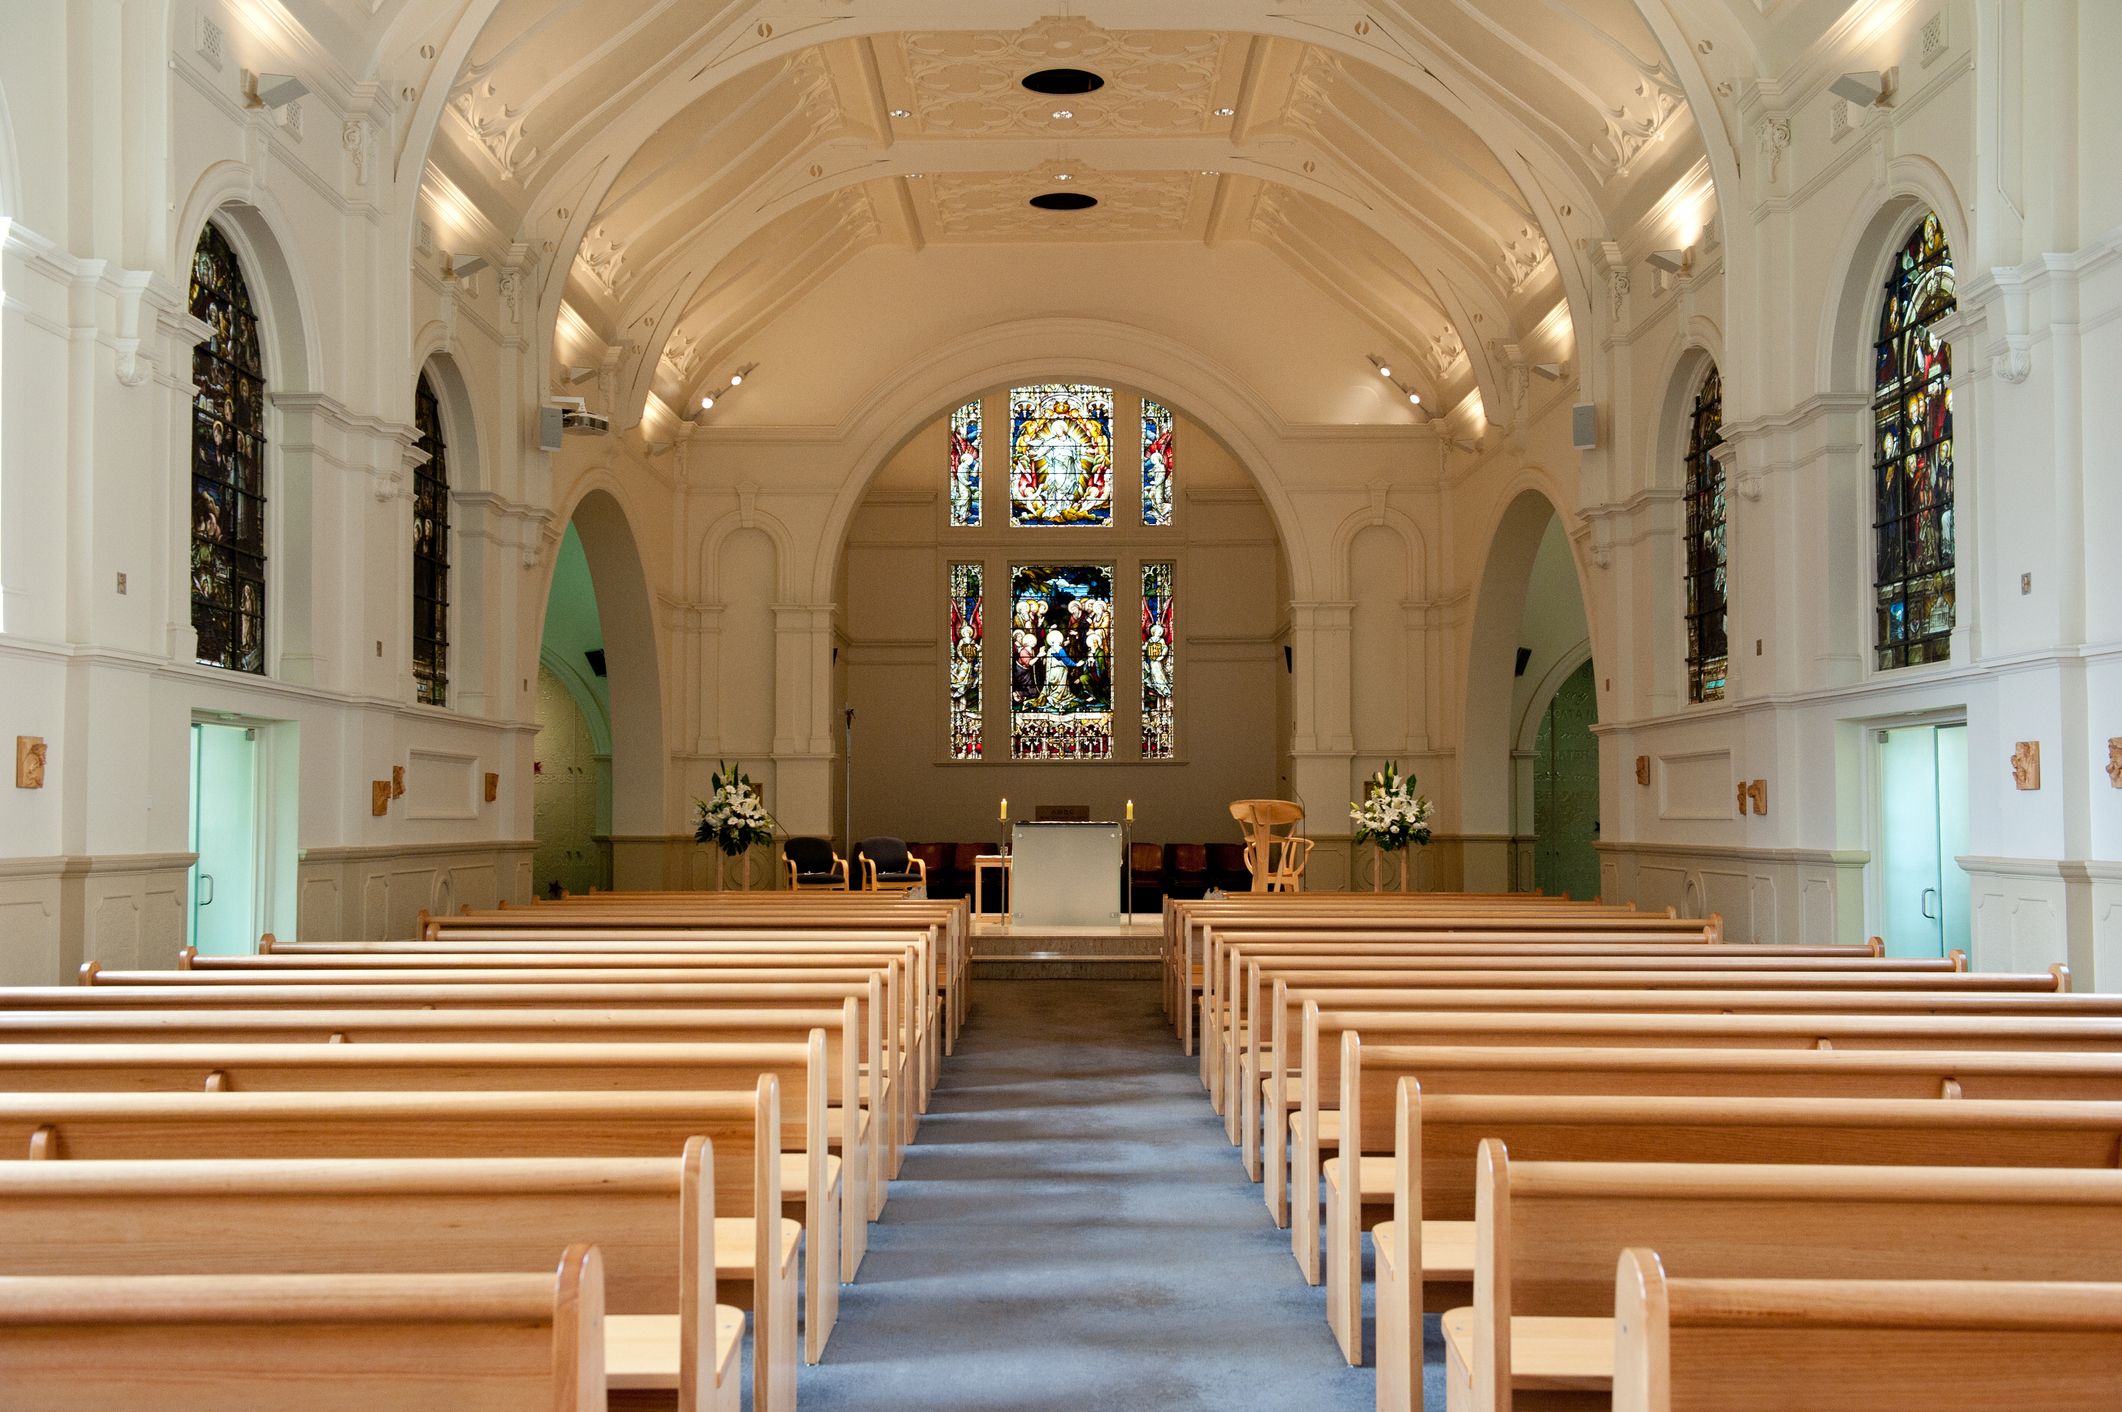 A glimpse of a church's interior. | Source: Getty Images